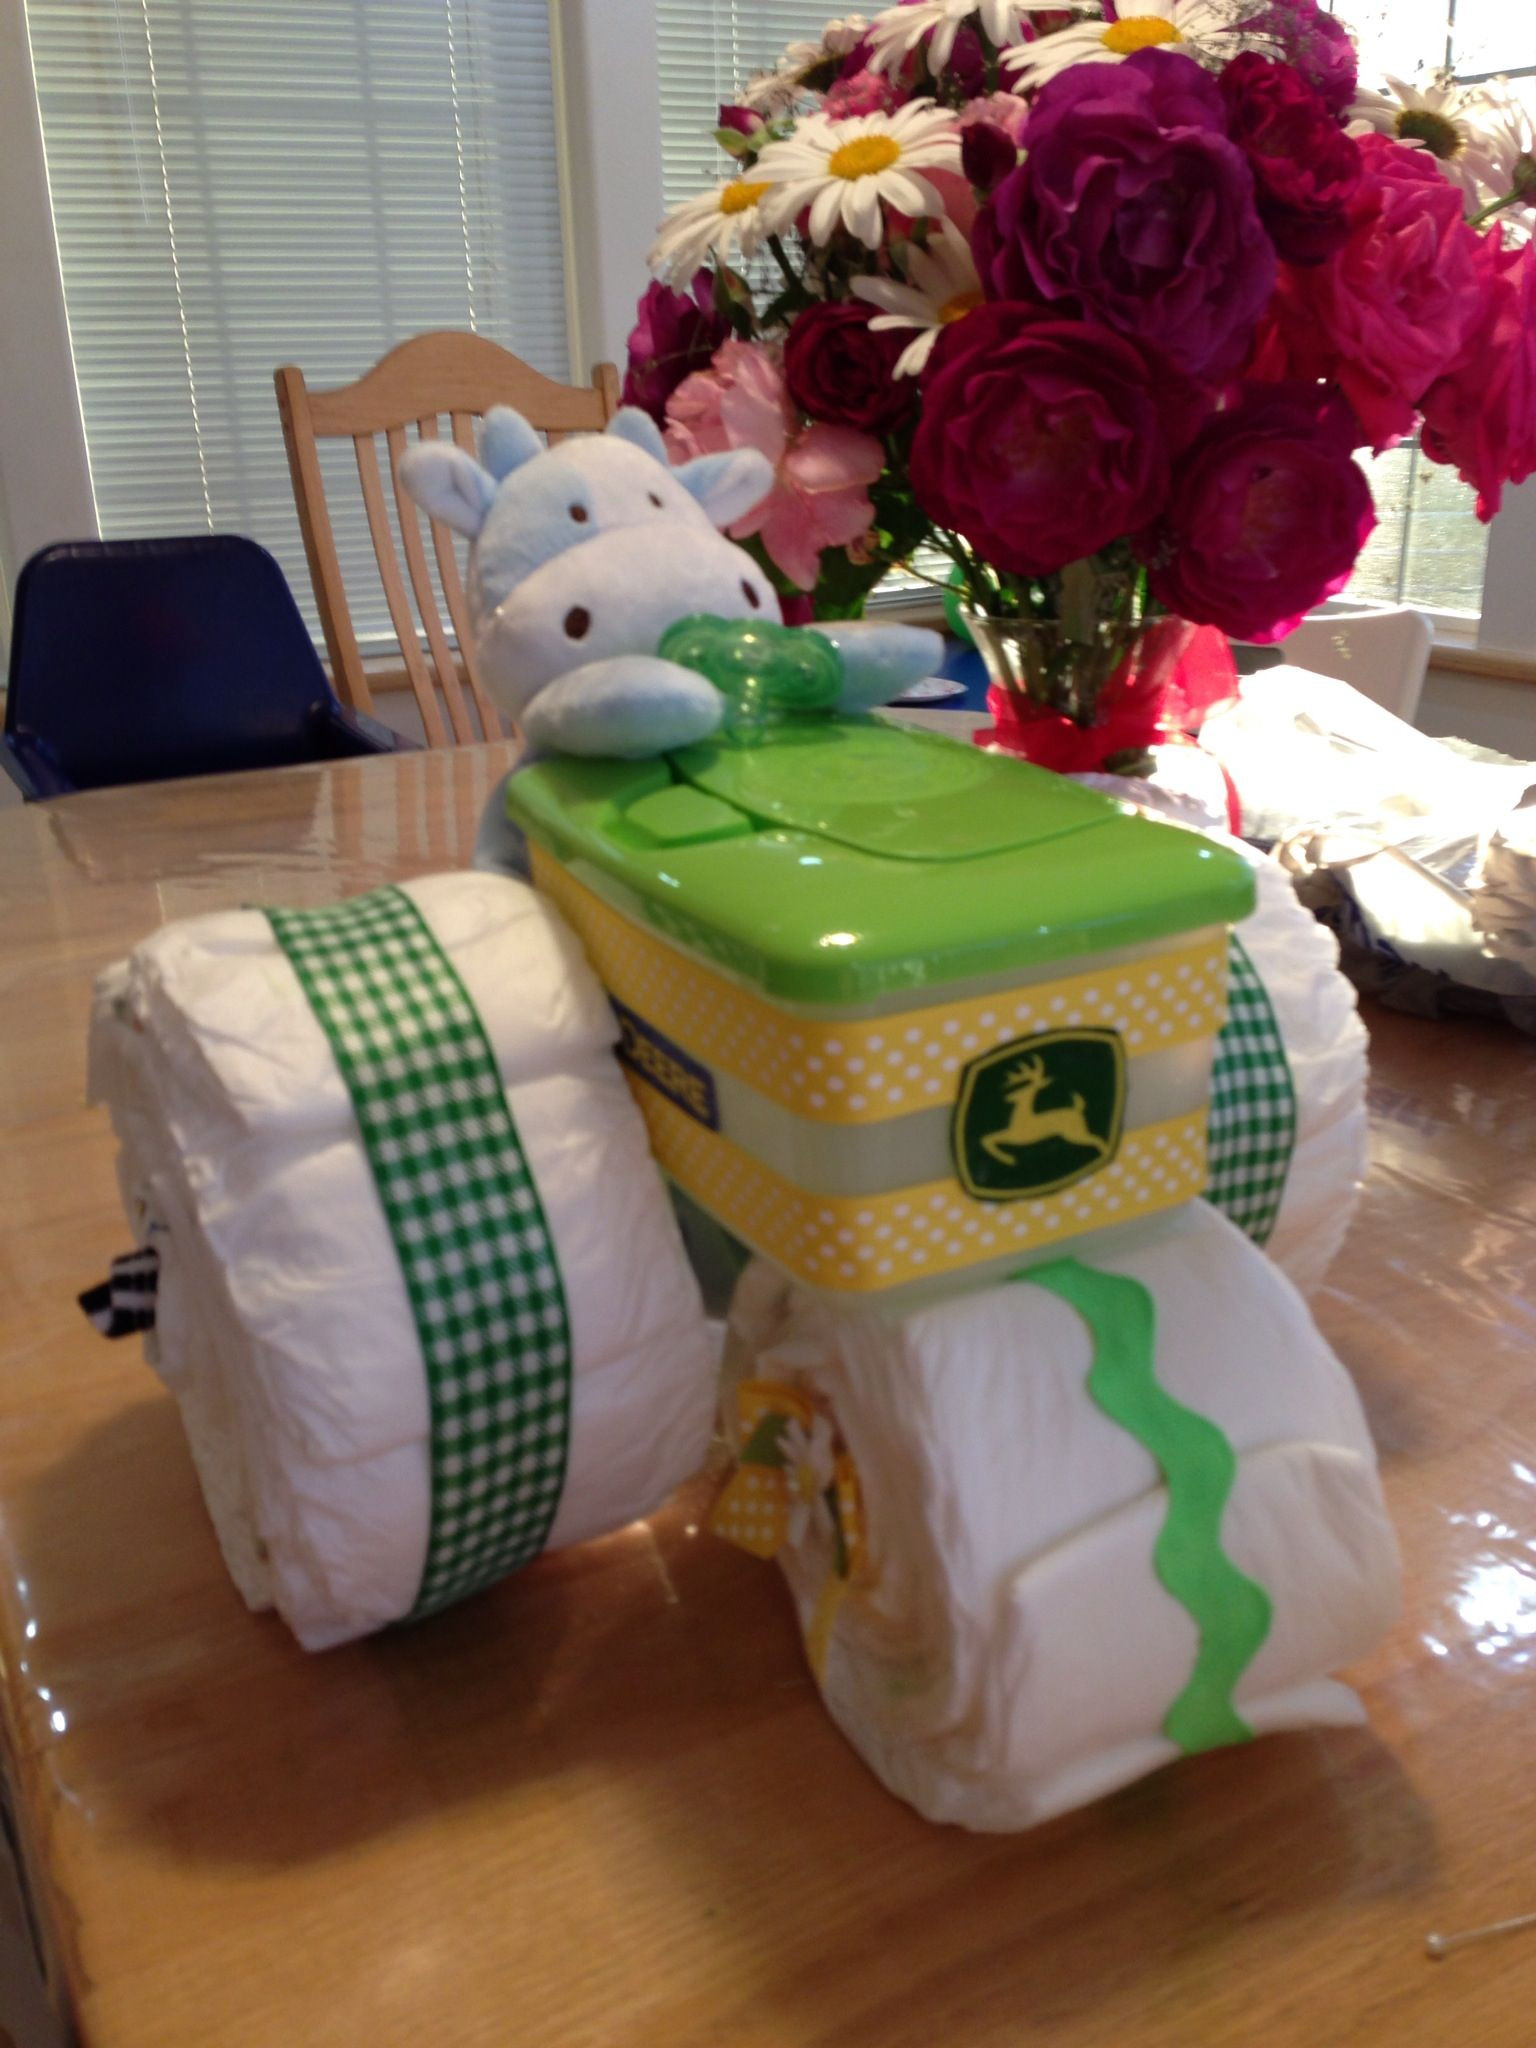 Diaper Baby Shower Gift Ideas
 Diaper tractor for my daughter s new baby